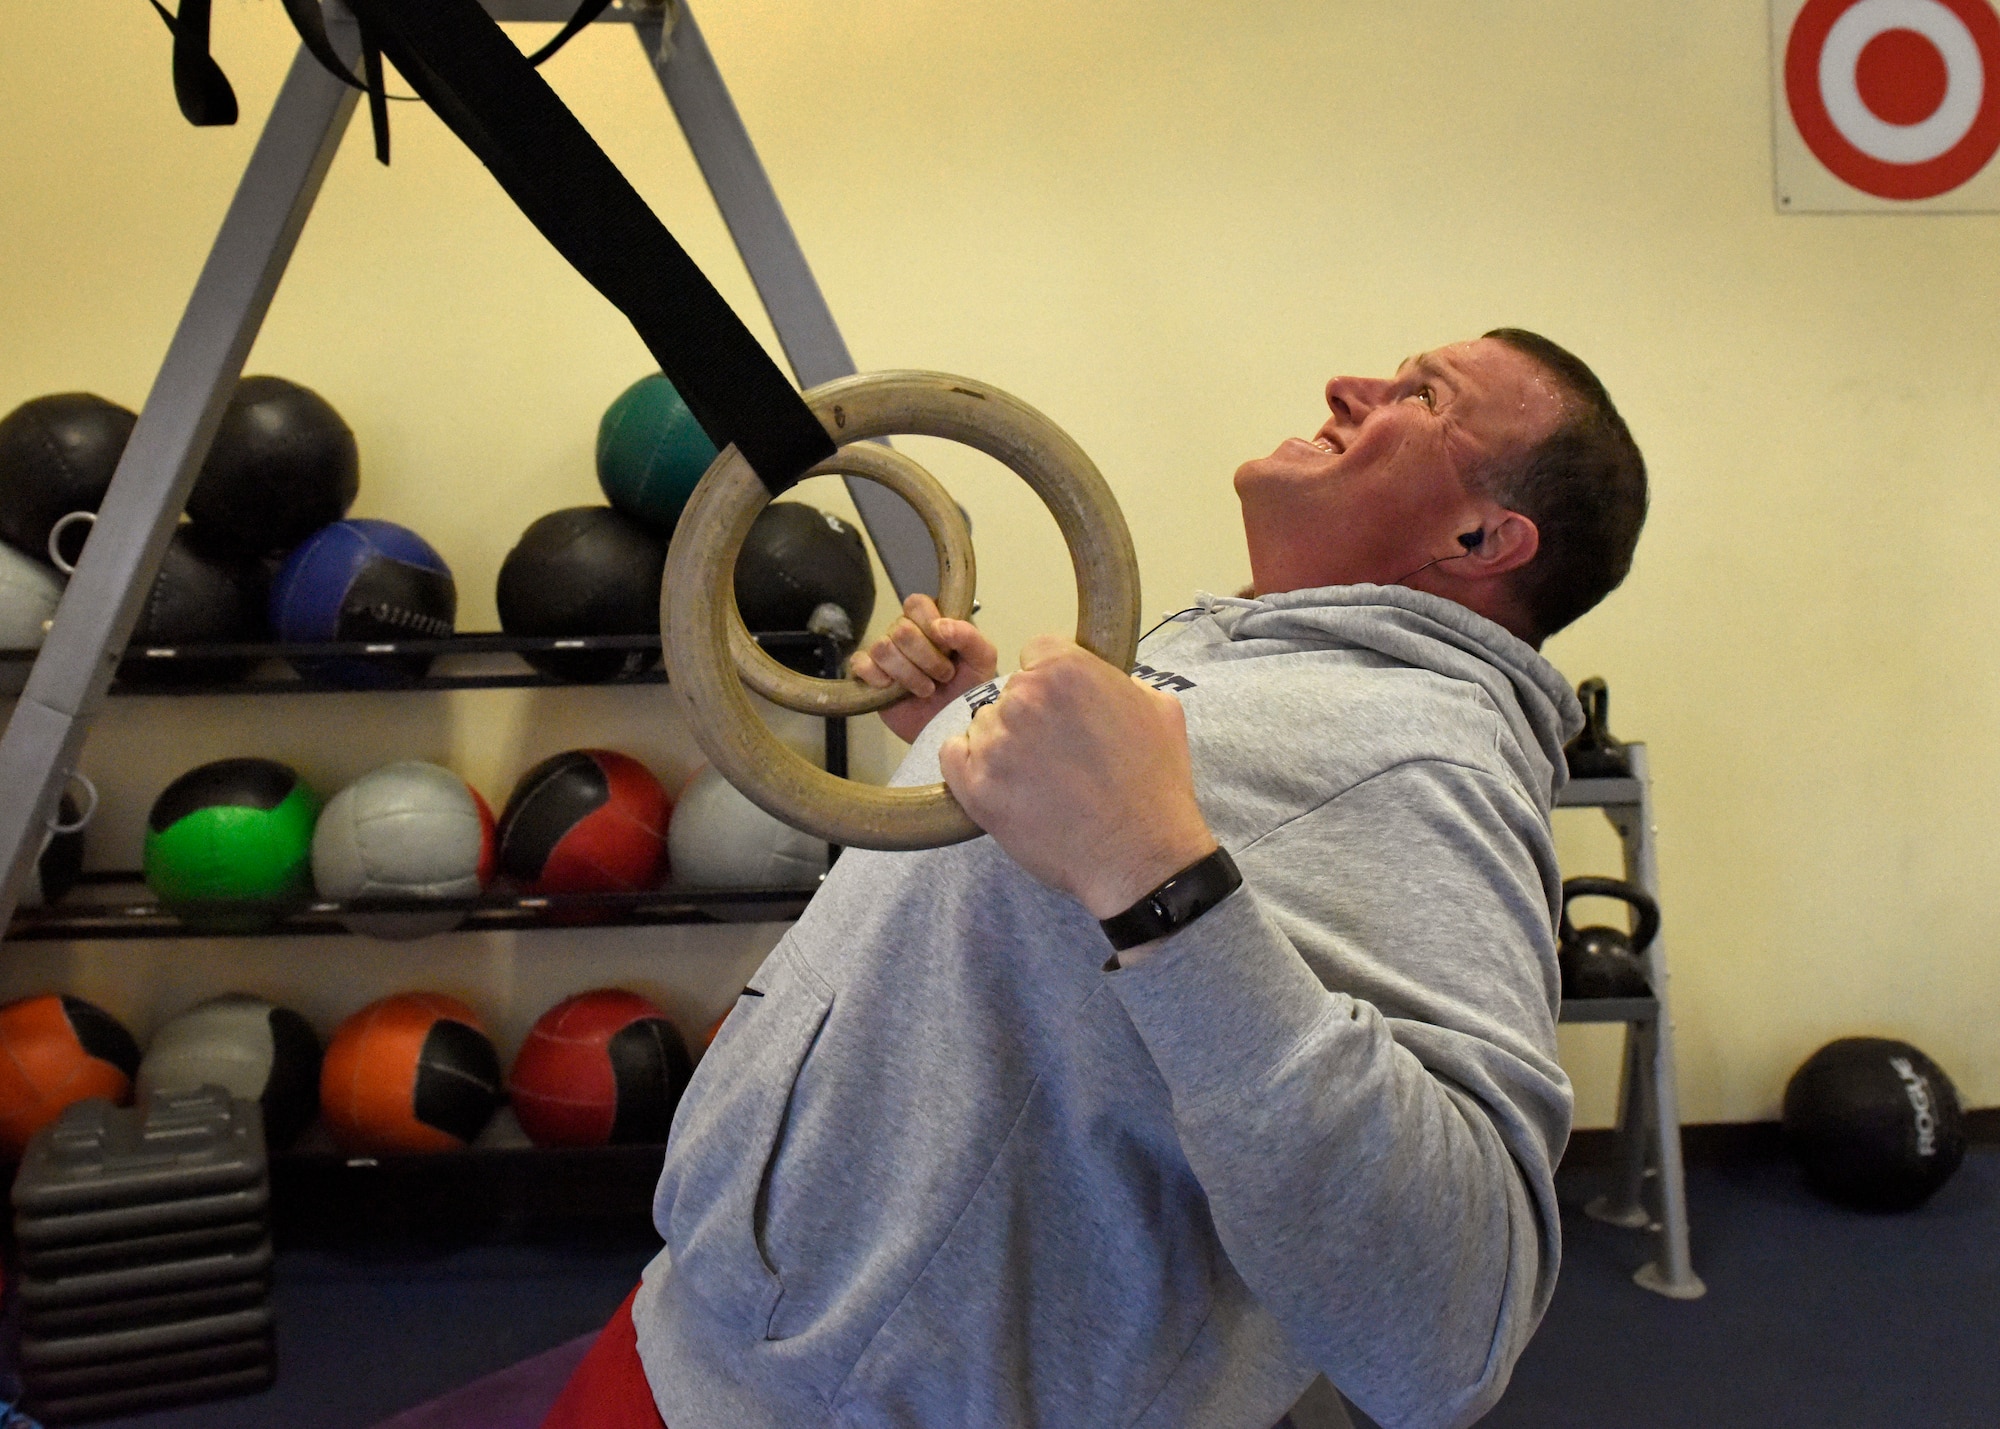 Master Sgt. Shawn Merritt, 92nd Aircraft Maintenance Squadron Human Performance Cell patient, performs inverted rows on rings at Fairchild Air Force Base, Washington, Feb. 26, 2018. In January, the 92nd Medical Group started HPC to aid in the full-spectrum of Airmen readiness. HPC is a multi-disciplinary medical specialist team designed to deliver one-on-one, personalized care to address specific physical demands that Airmen may face using a proactive approach. (U.S. Air Force photo/Airman 1st Class Jesenia Landaverde)